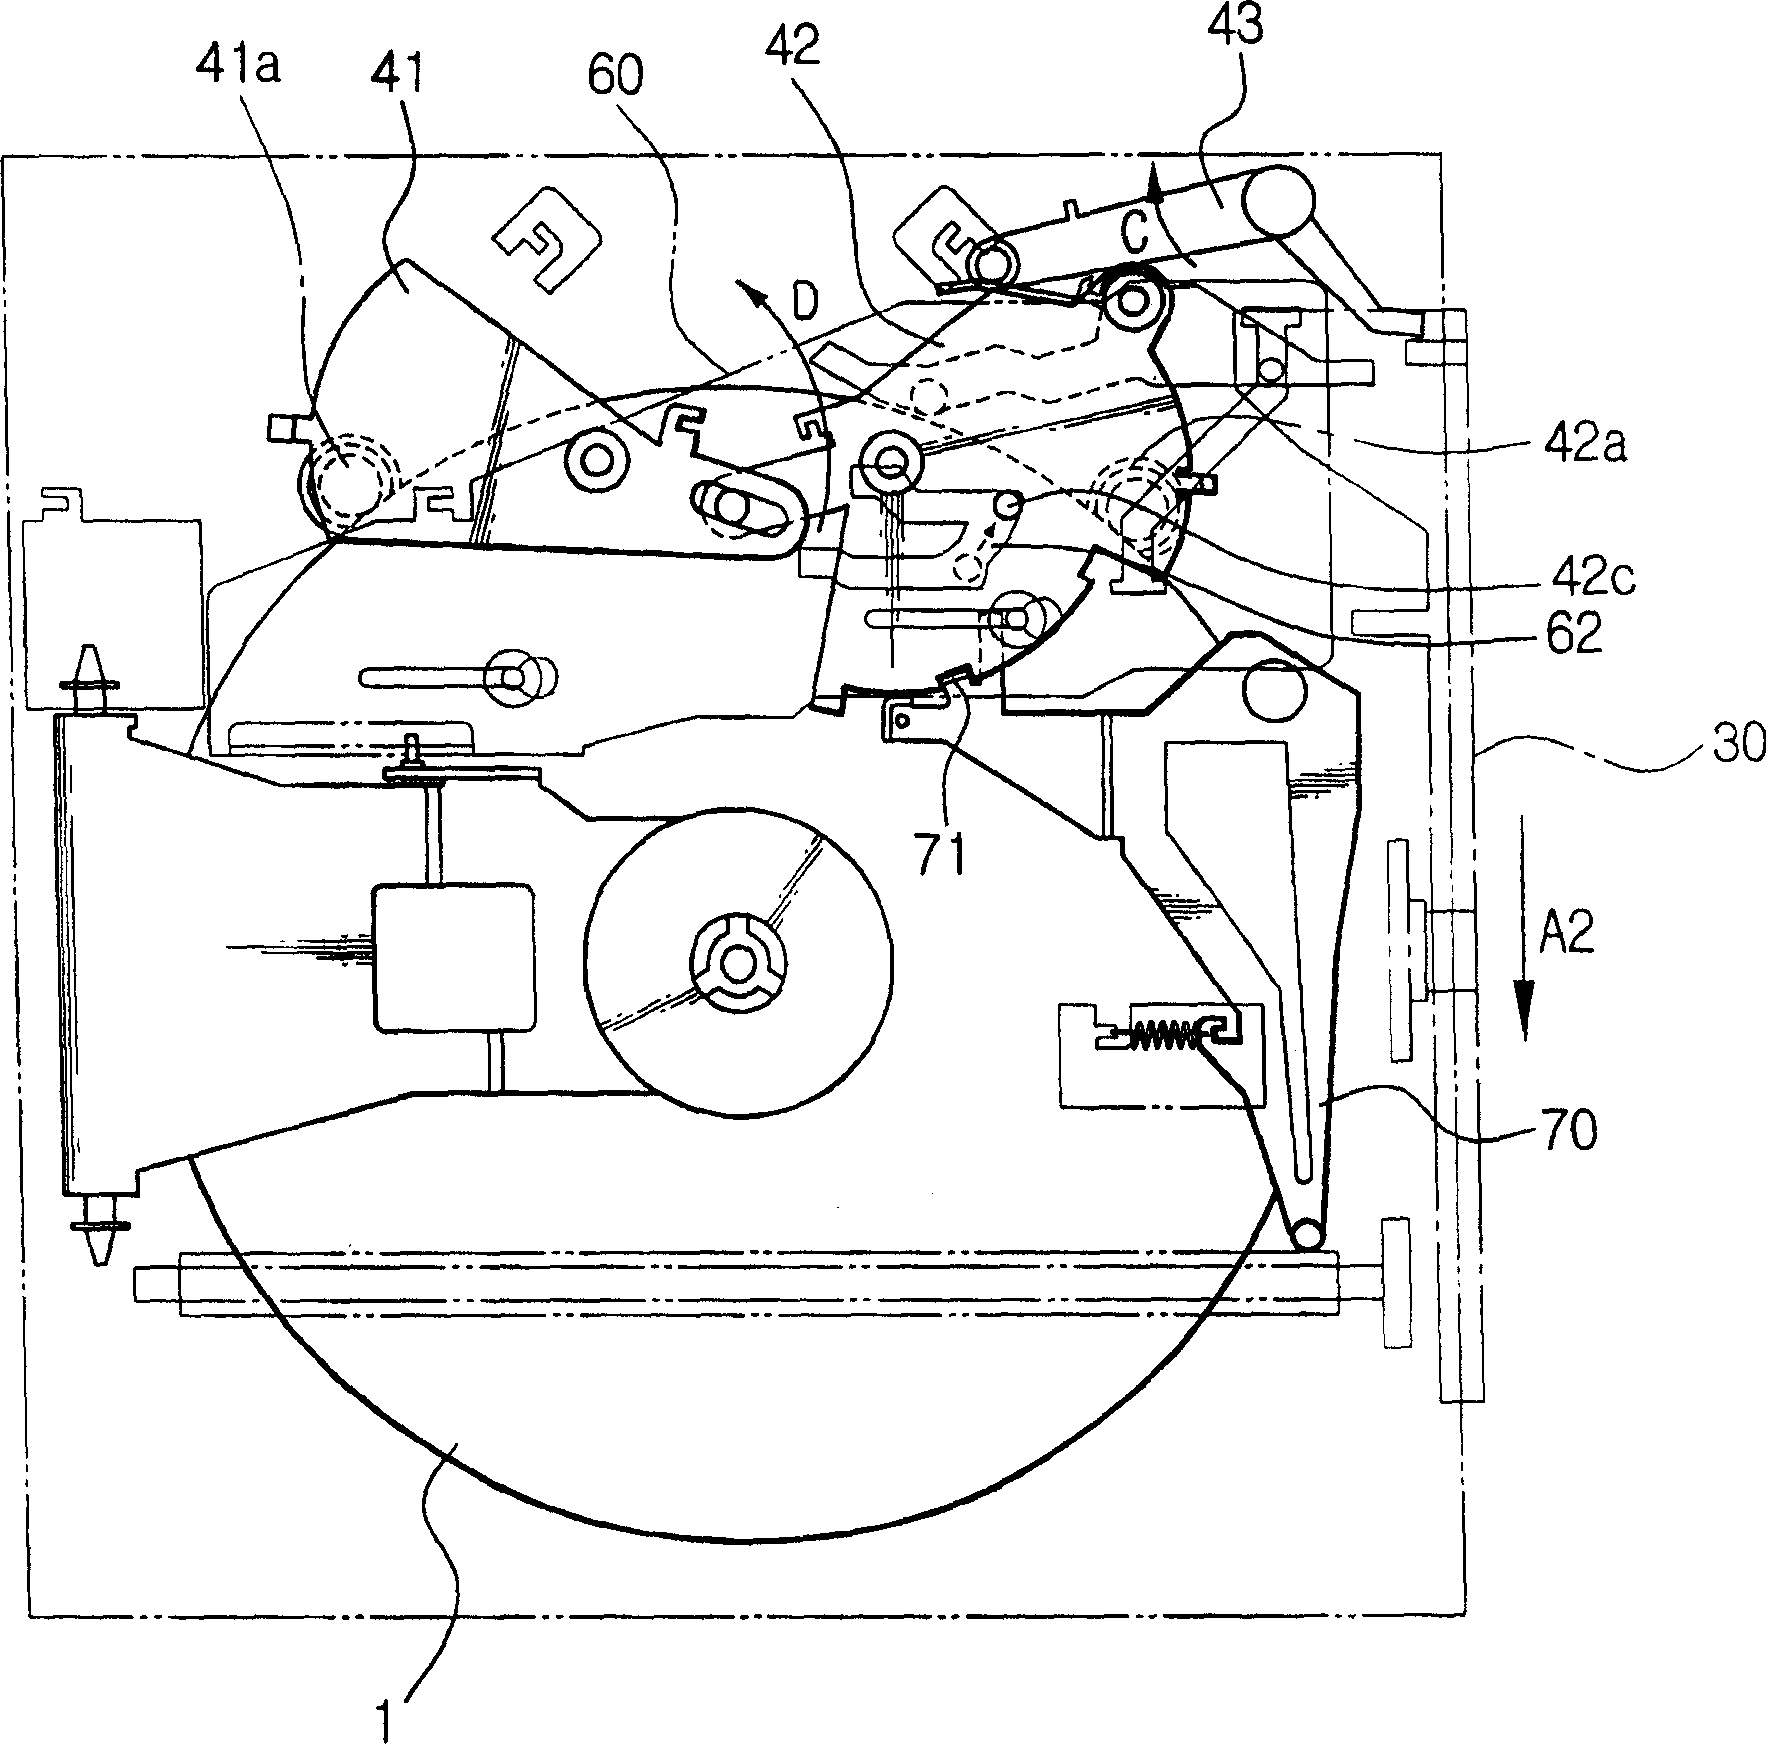 Apparatus for loading a disk in an optical disk player